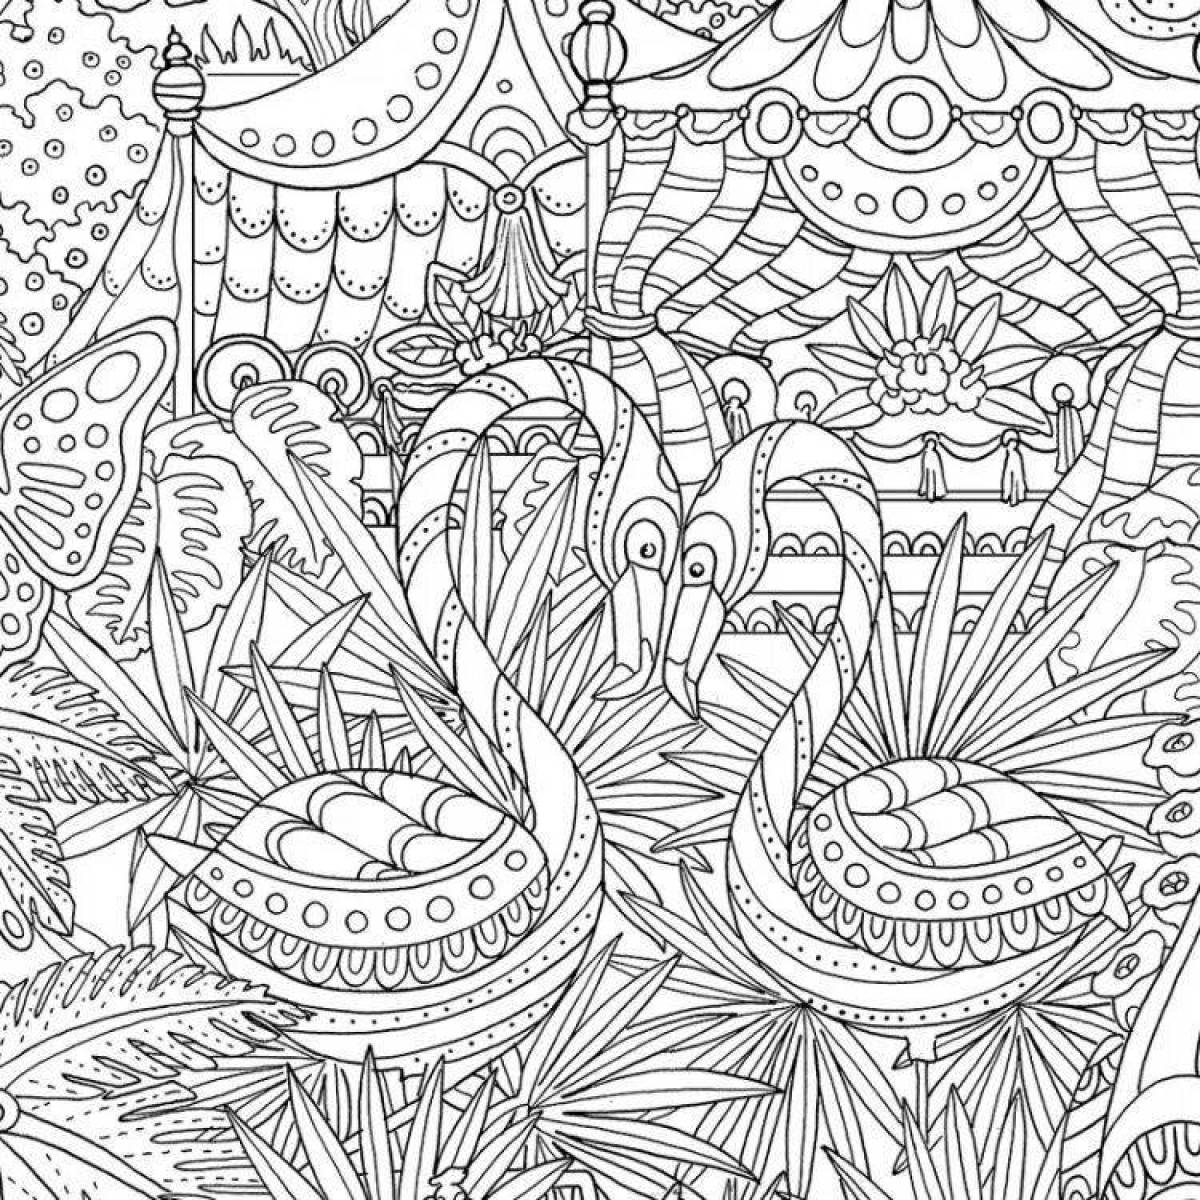 Colourful anti-stress coloring book for adults